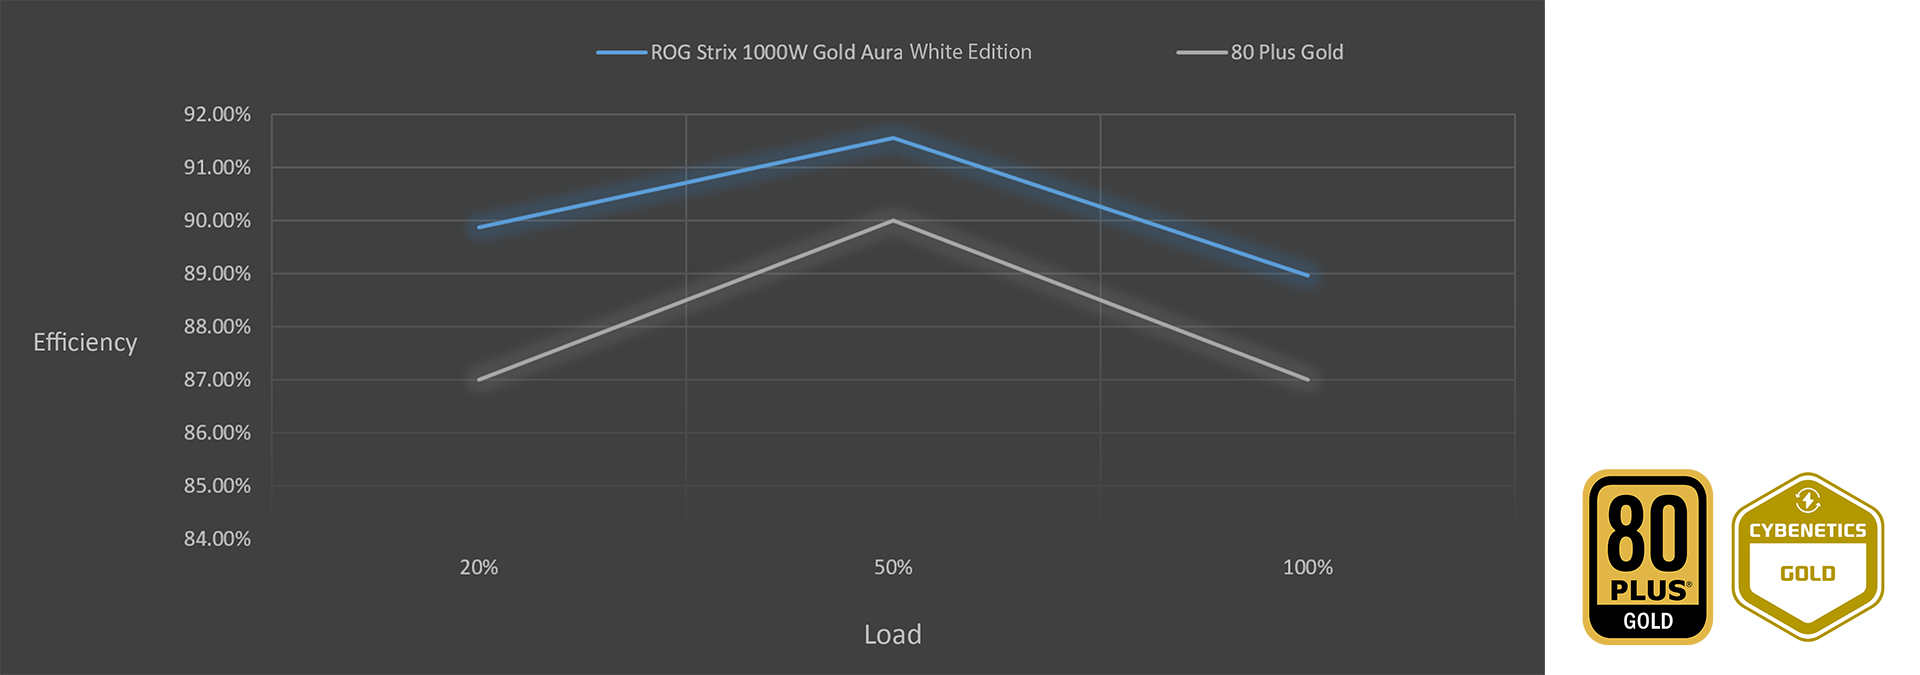 Efficiency curve of ROG Strix 1000W Gold Aura White Edition with 80 plus gold and cybenetics gold certification